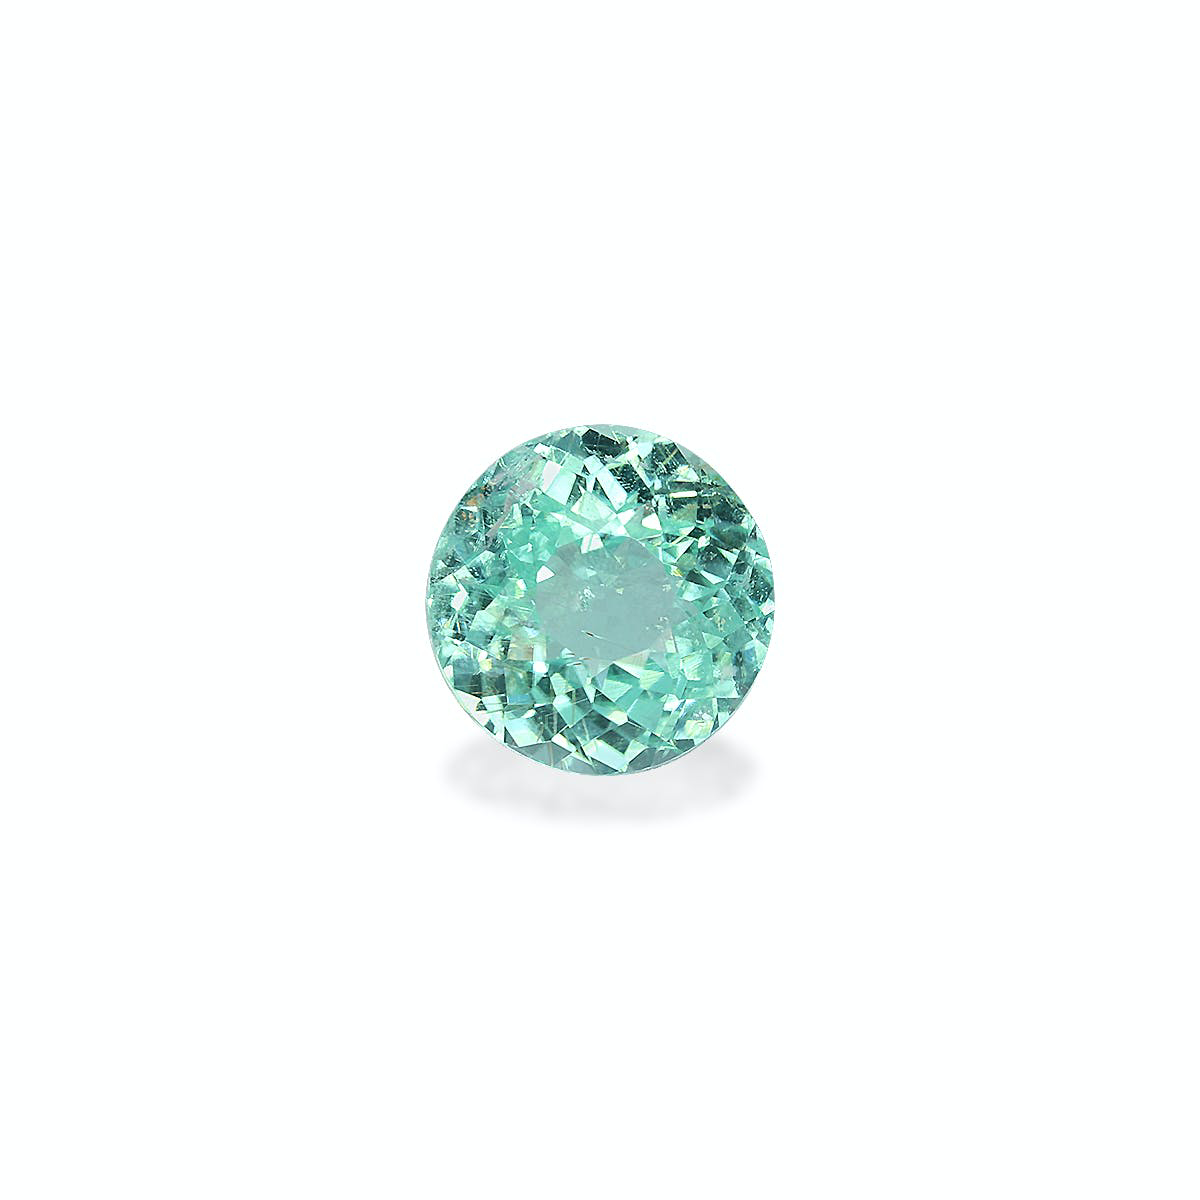 Picture of Neon Green Paraiba Tourmaline 1.15ct - 6mm (PA1491)